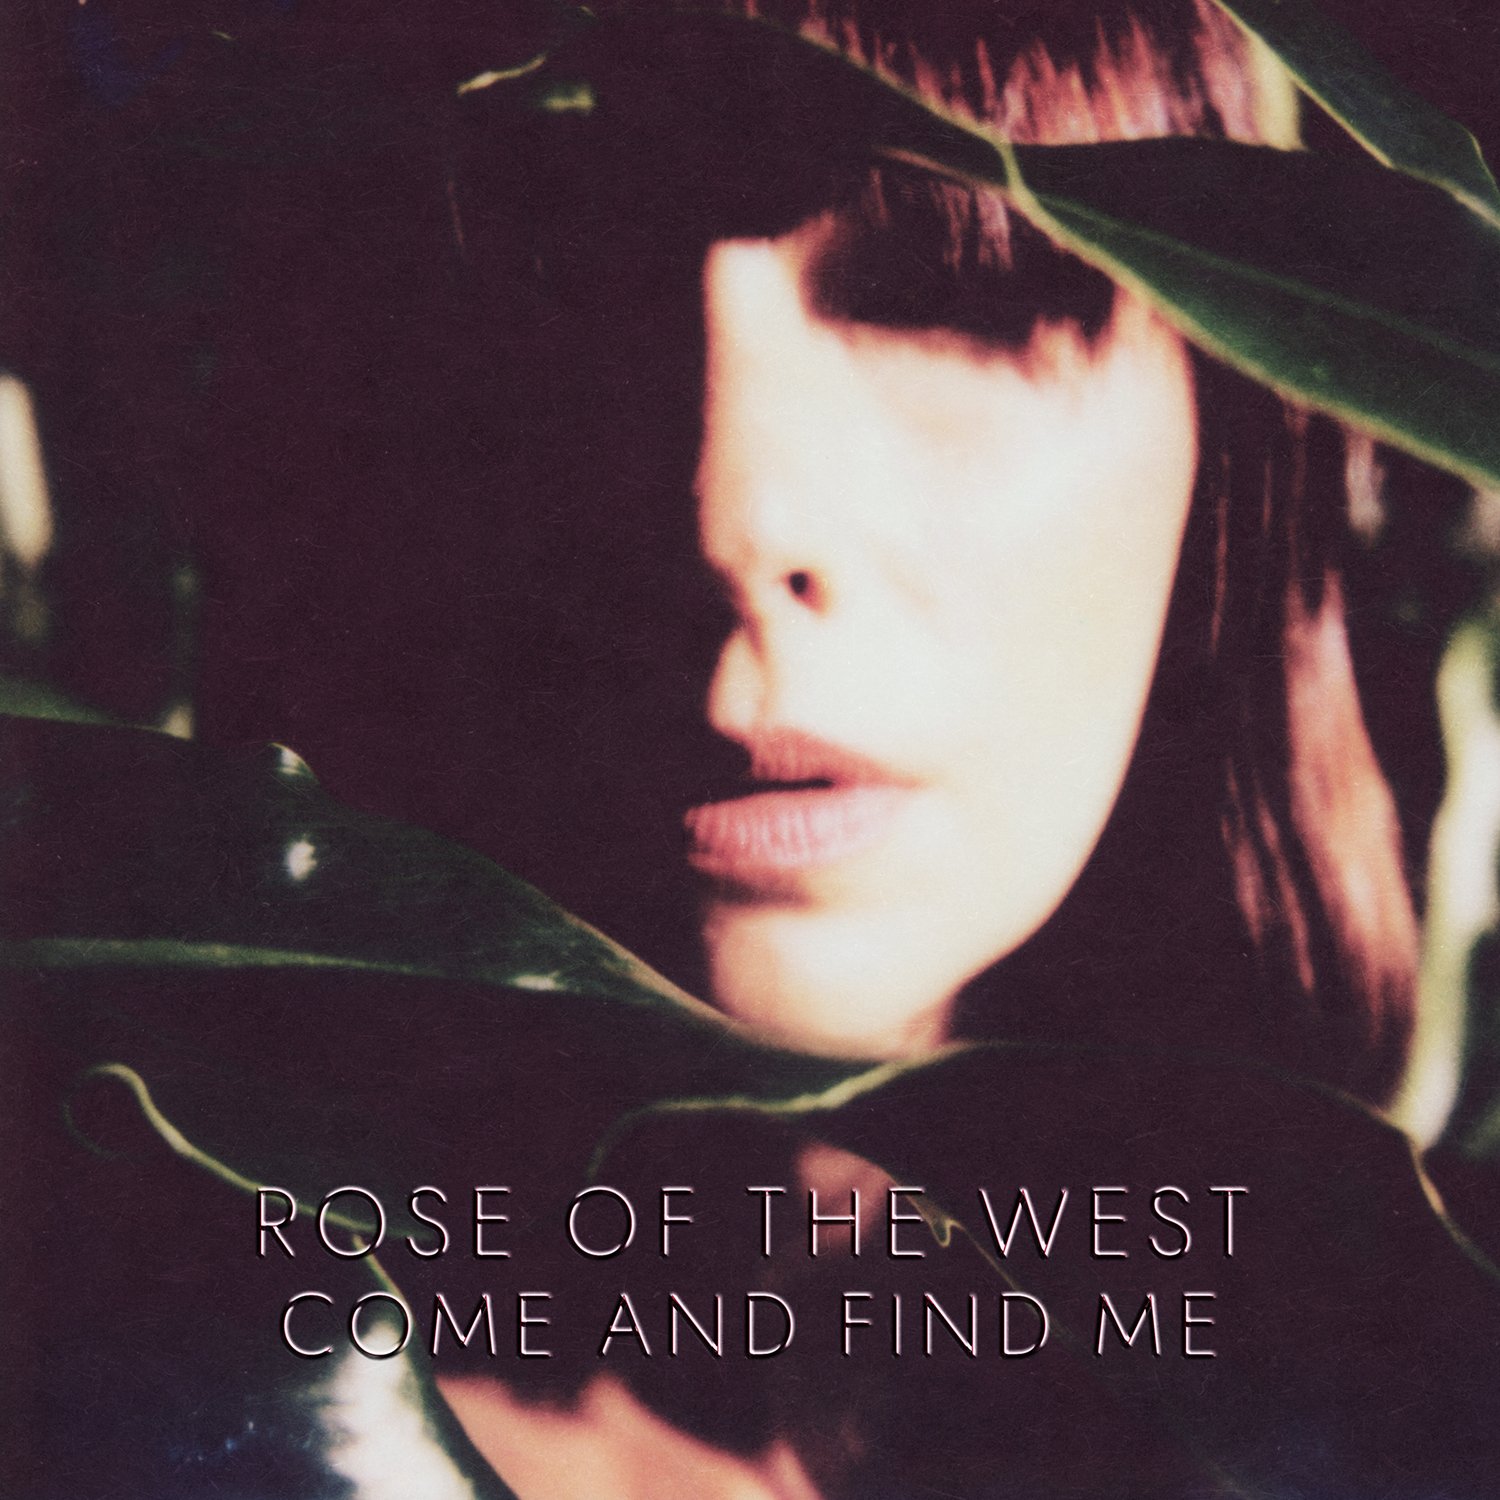 rotw_comeandfindme_v3A_1500.jpg